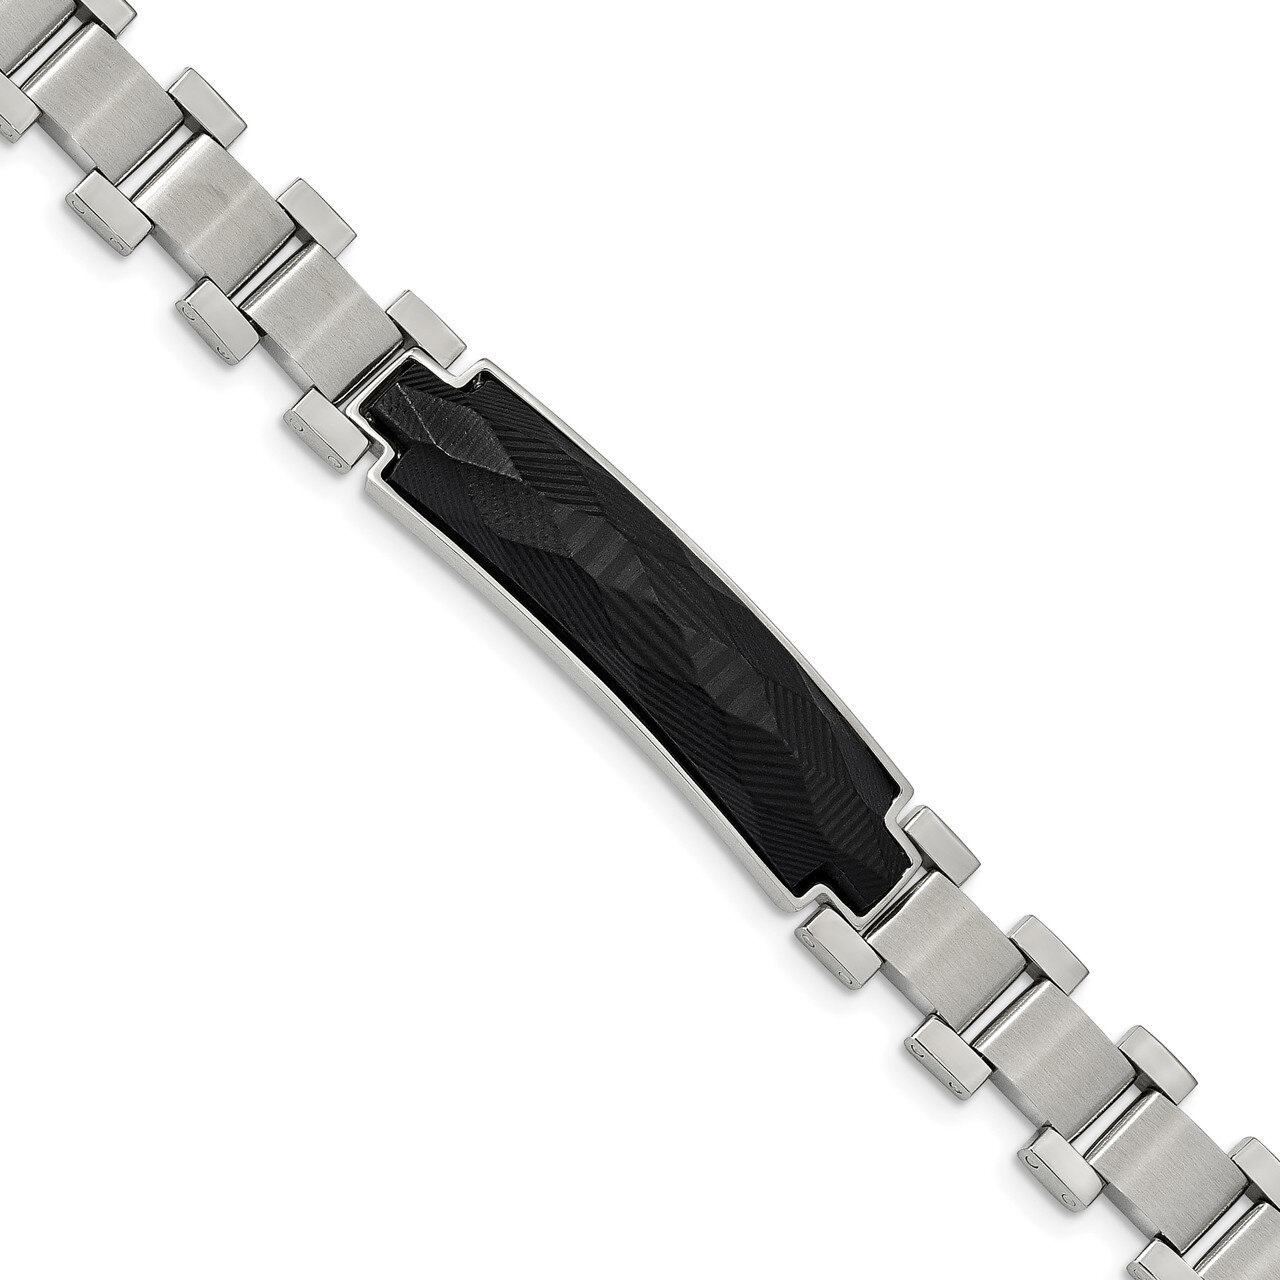 Solid Carbon Fiber Inlay 8.25 Inch Bracelet Stainless Steel Brushed and Polished SRB1960-8.25